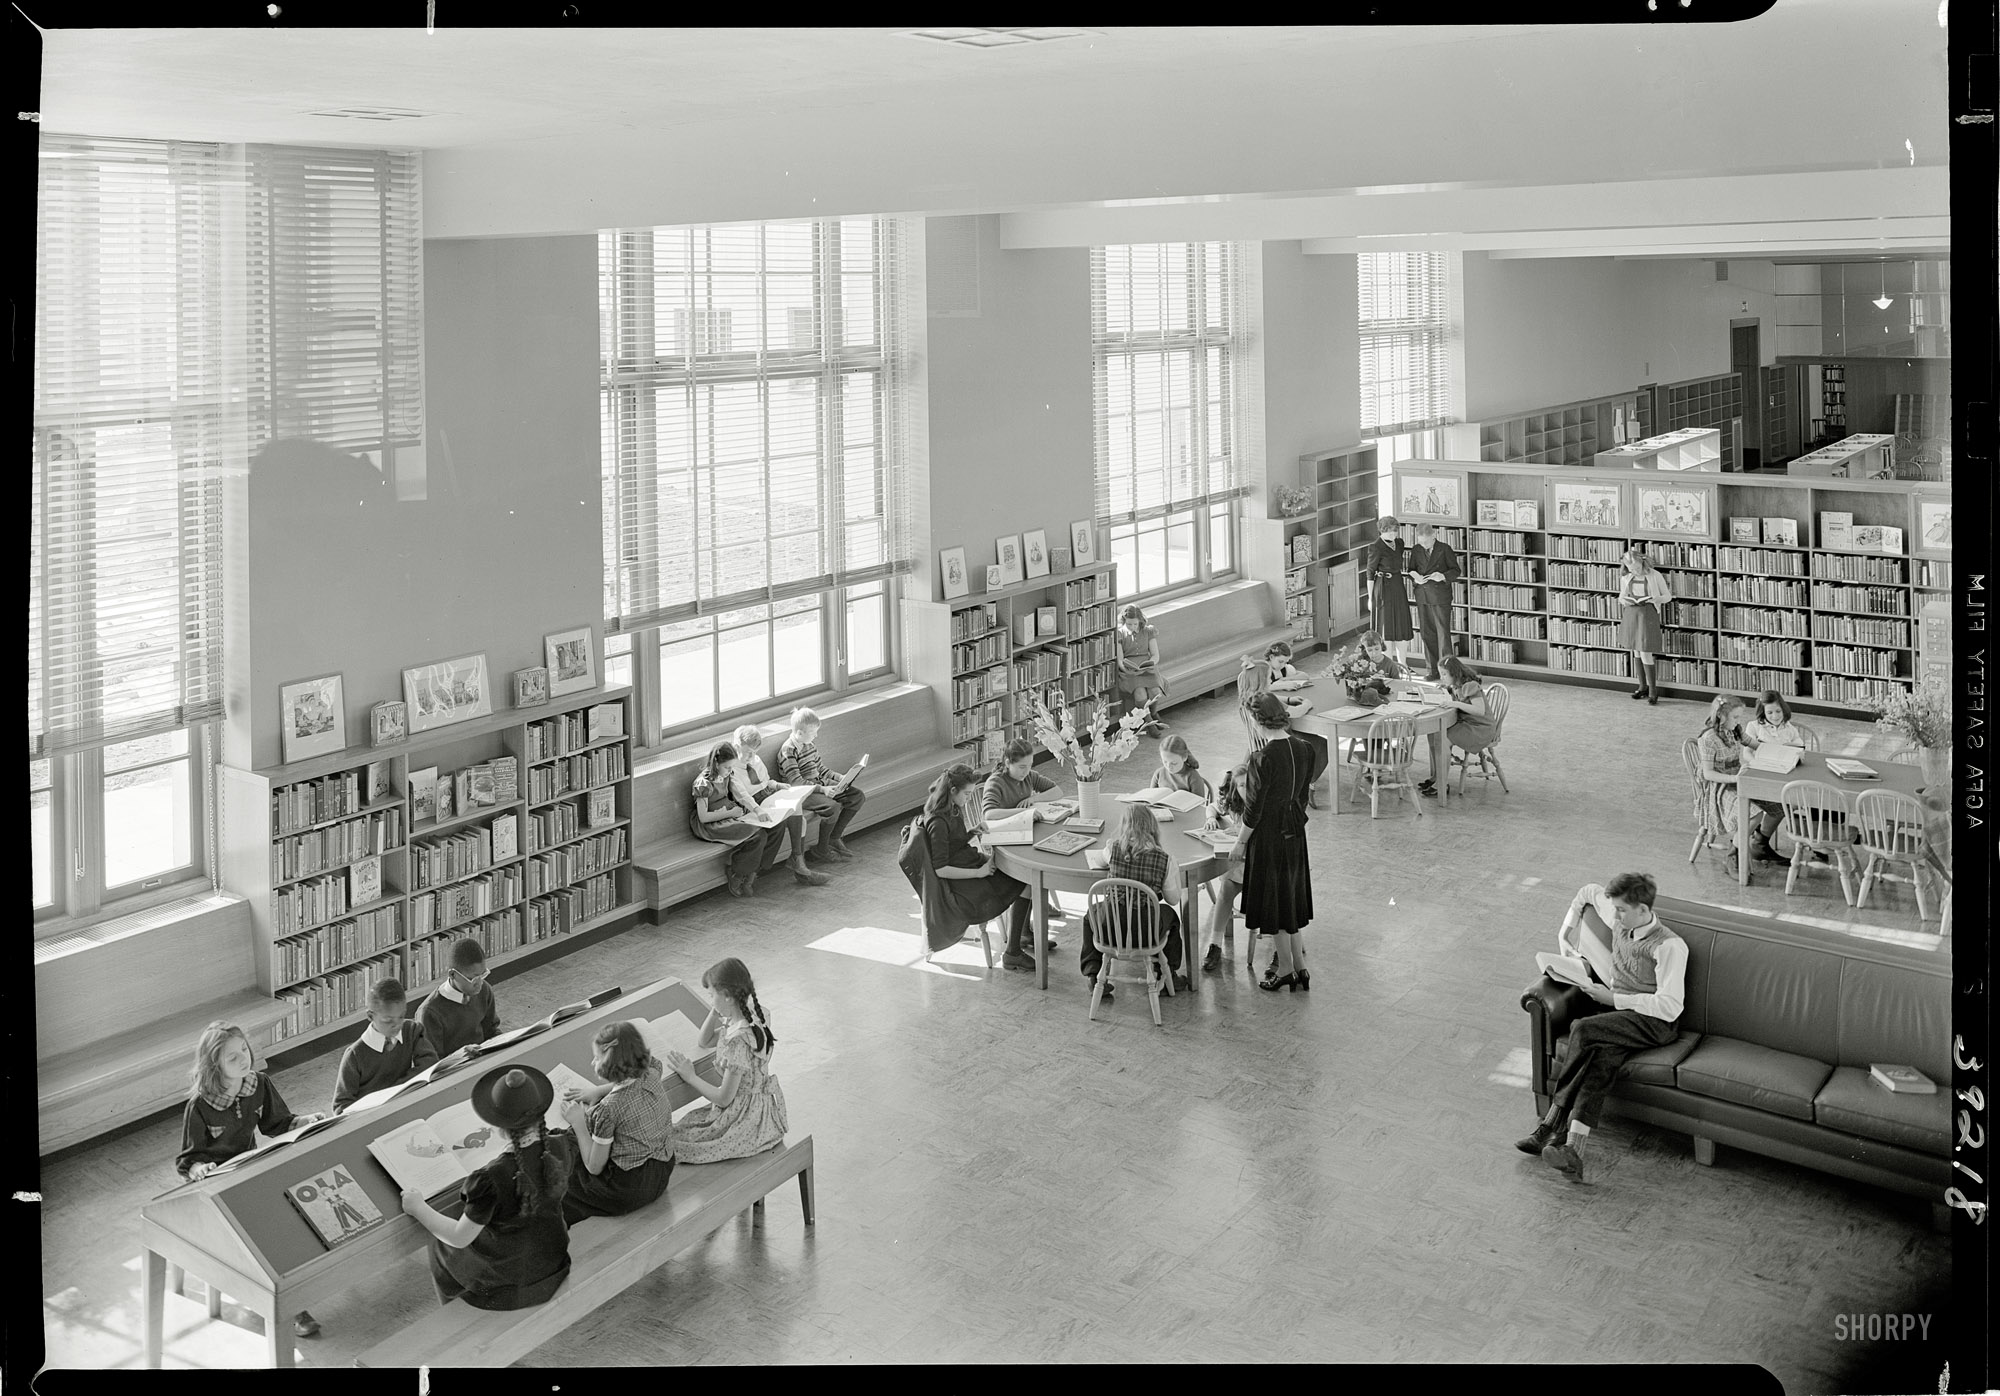 February 1, 1941. "Brooklyn Public Library, Prospect Park Plaza. Children's Room, from balcony." 5x7 safety negative by Gottscho-Schleisner. View full size.